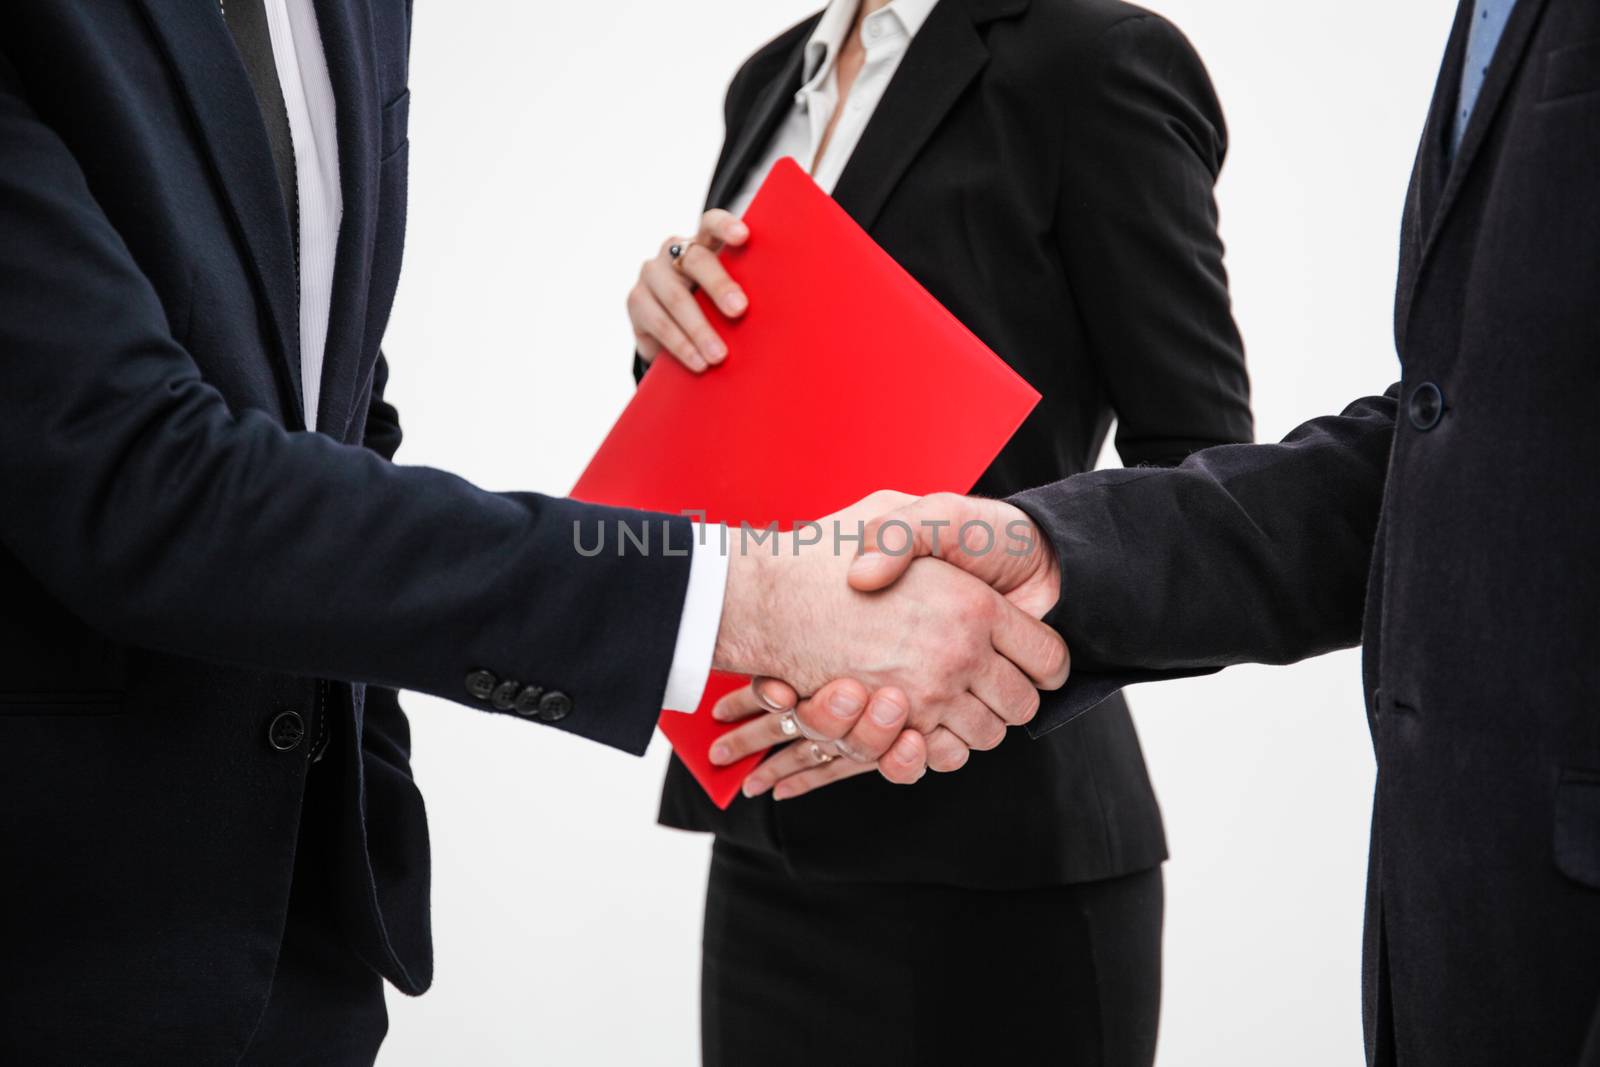 Business people shaking hands, finishing up a meeting, white background